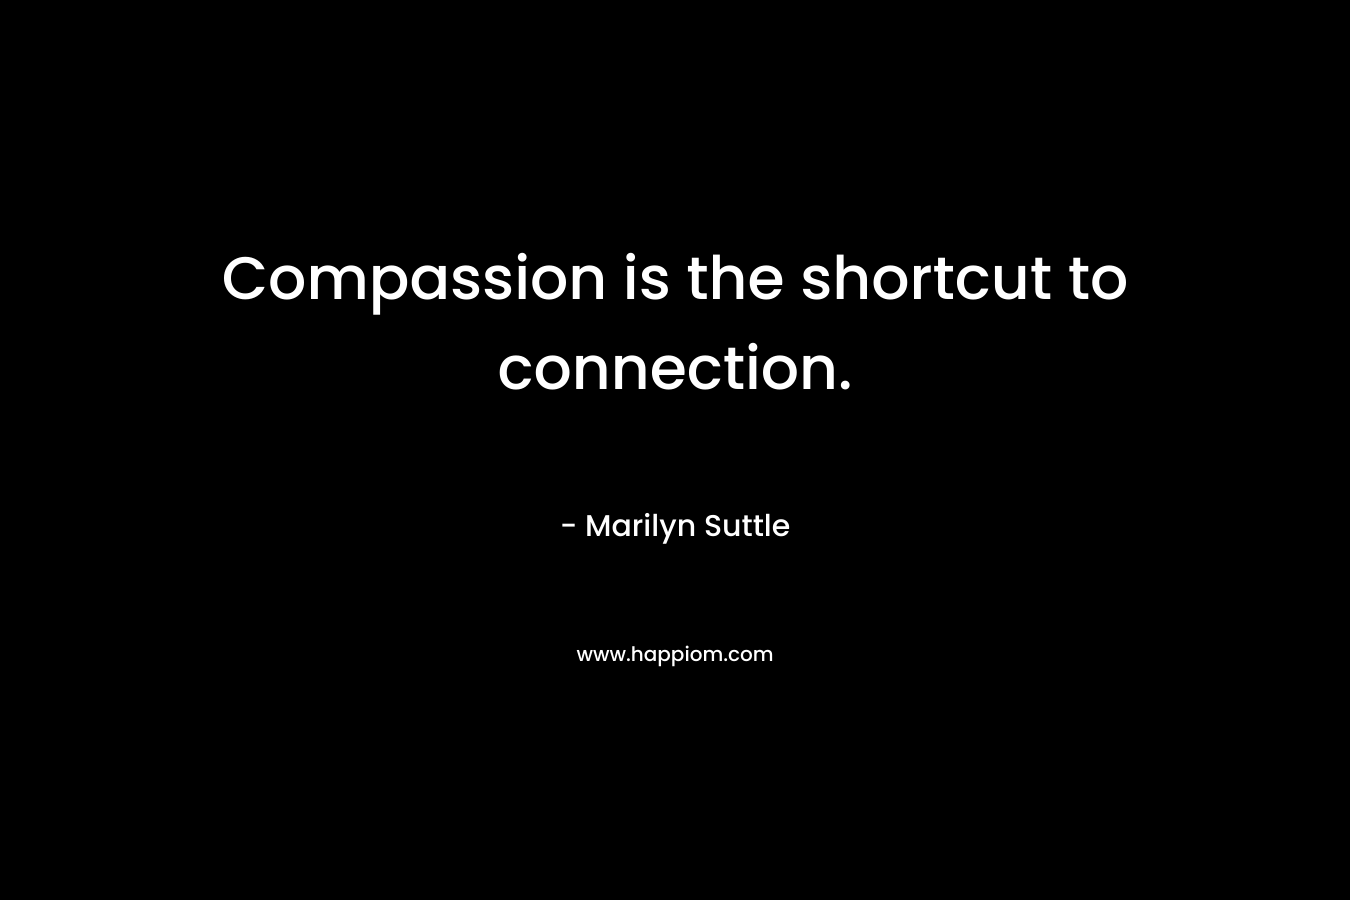 Compassion is the shortcut to connection.